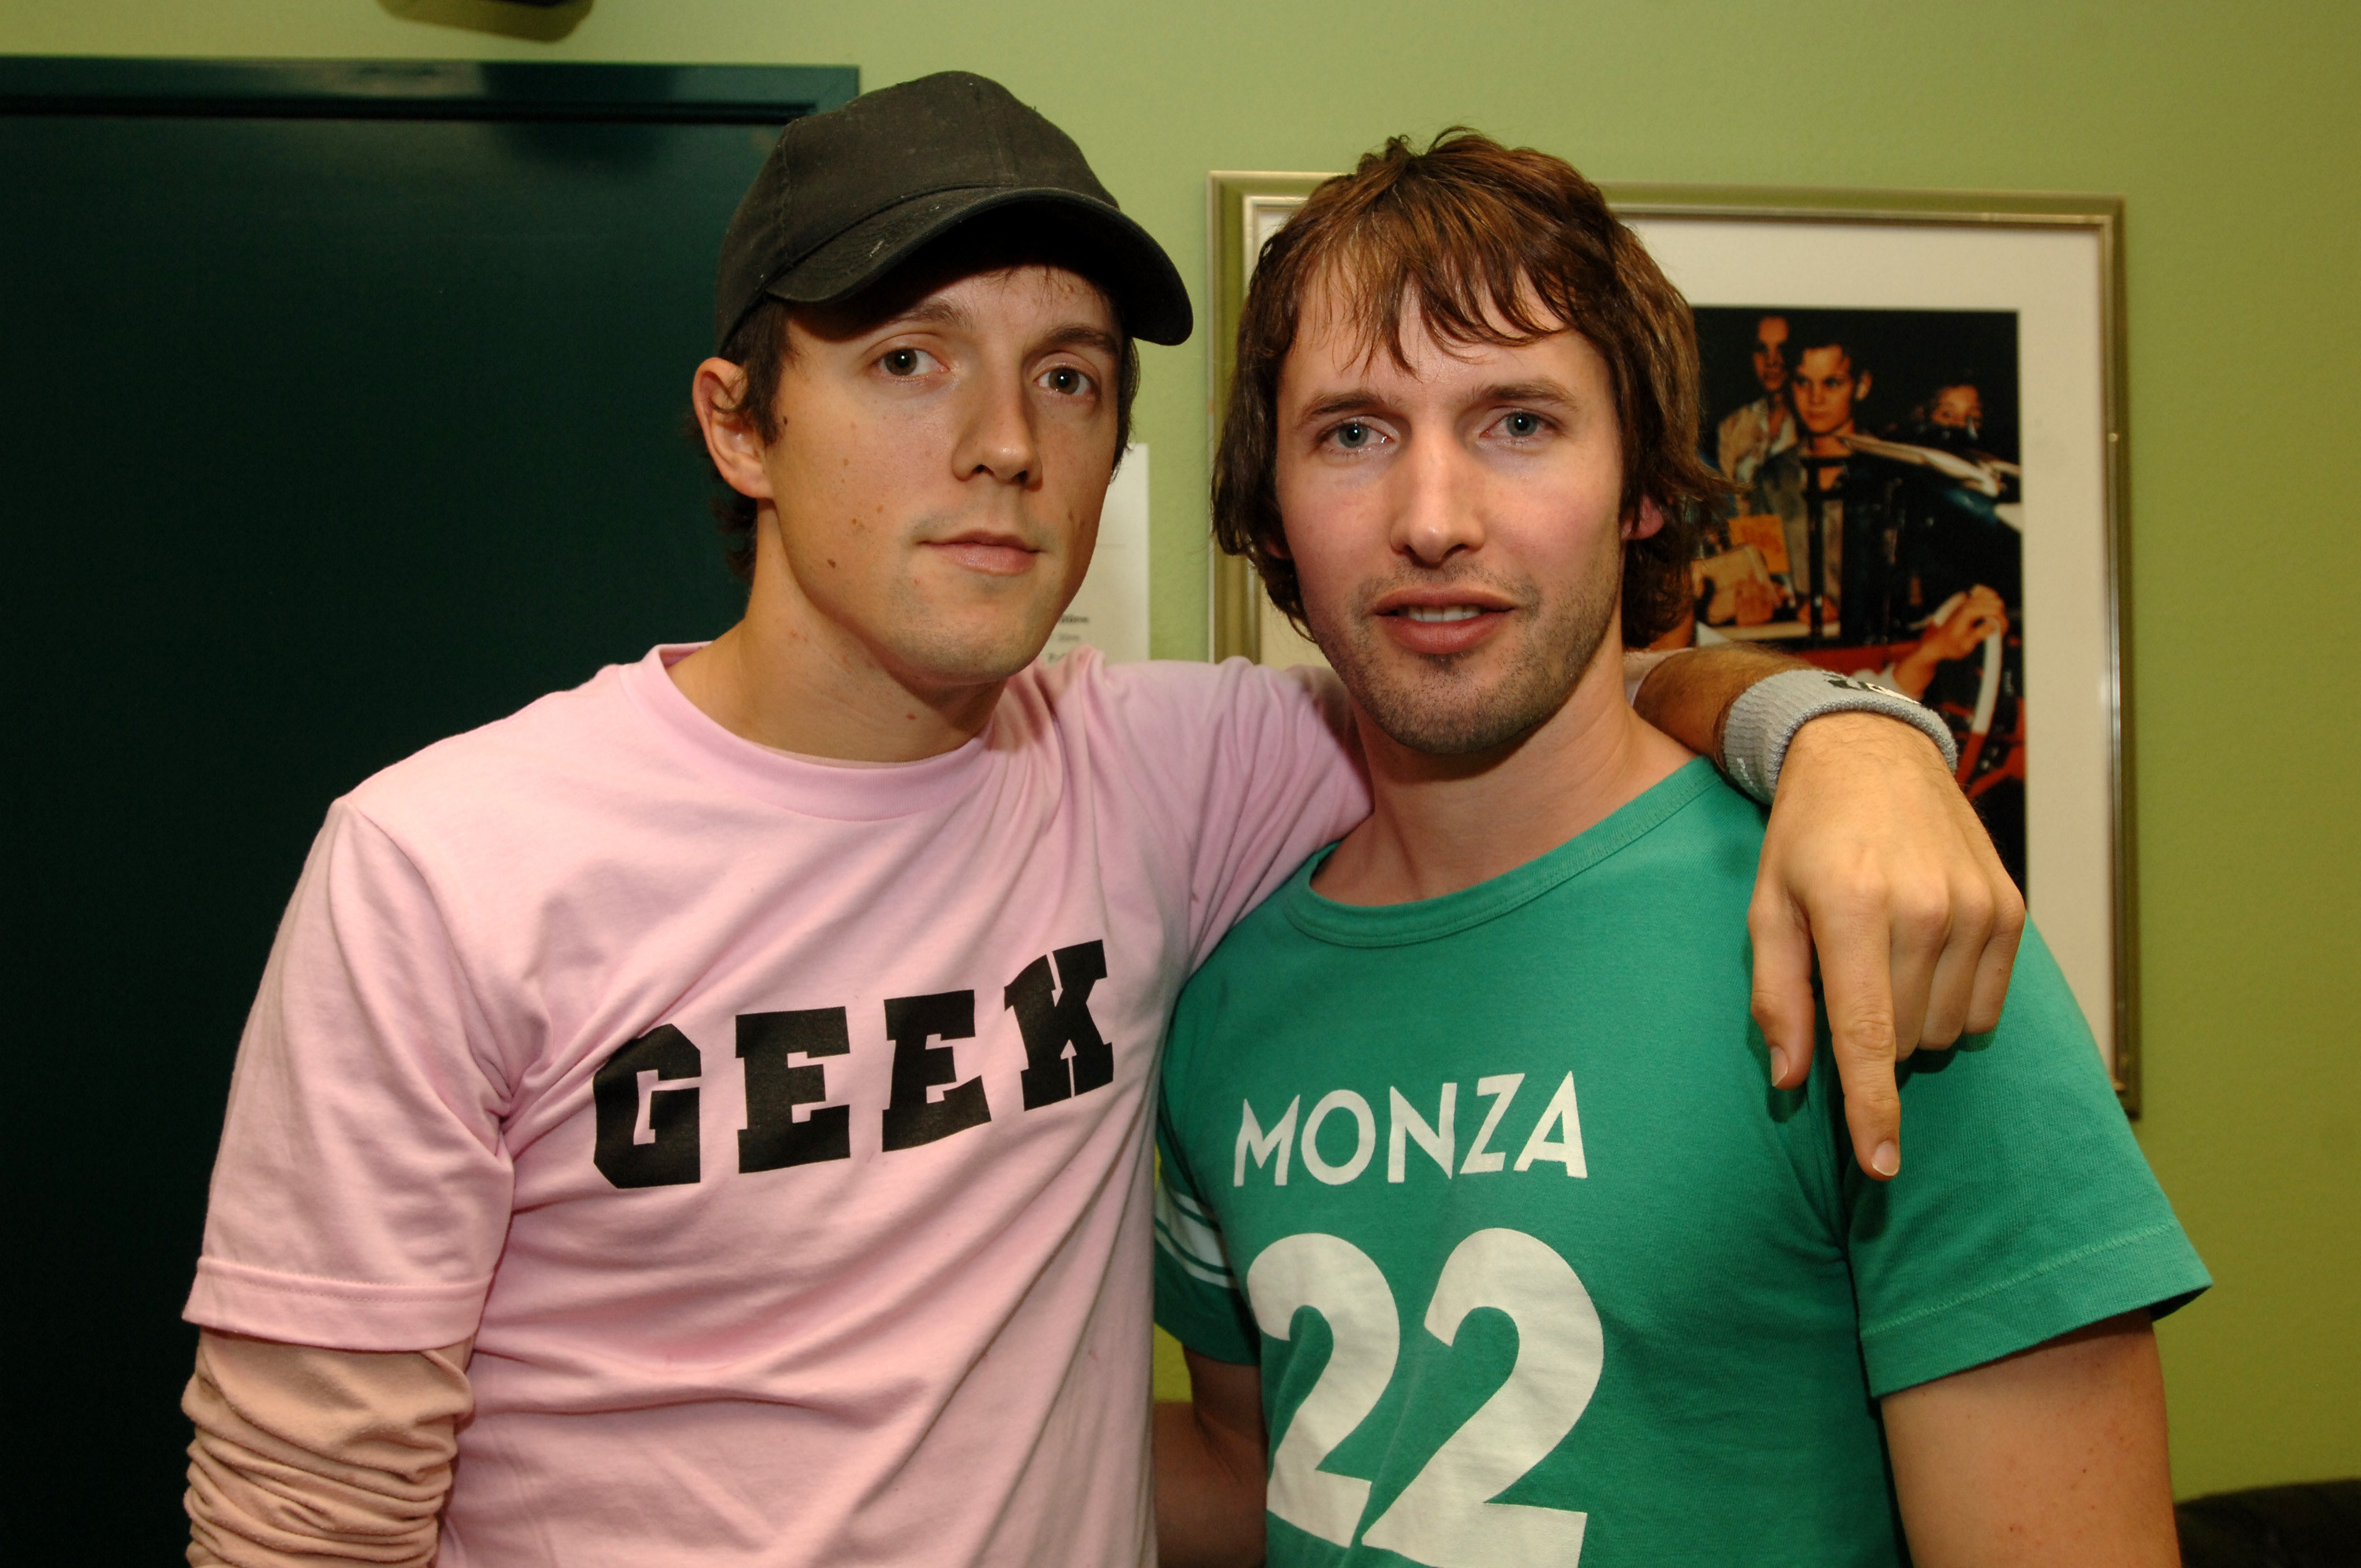 Jason Mraz wearing a black baseball cap and pink T-shirt with &quot;geek&quot; written on it, and James Blunt wearing green vintage looking T-shirt with &quot;Monza 22&quot; written on it.